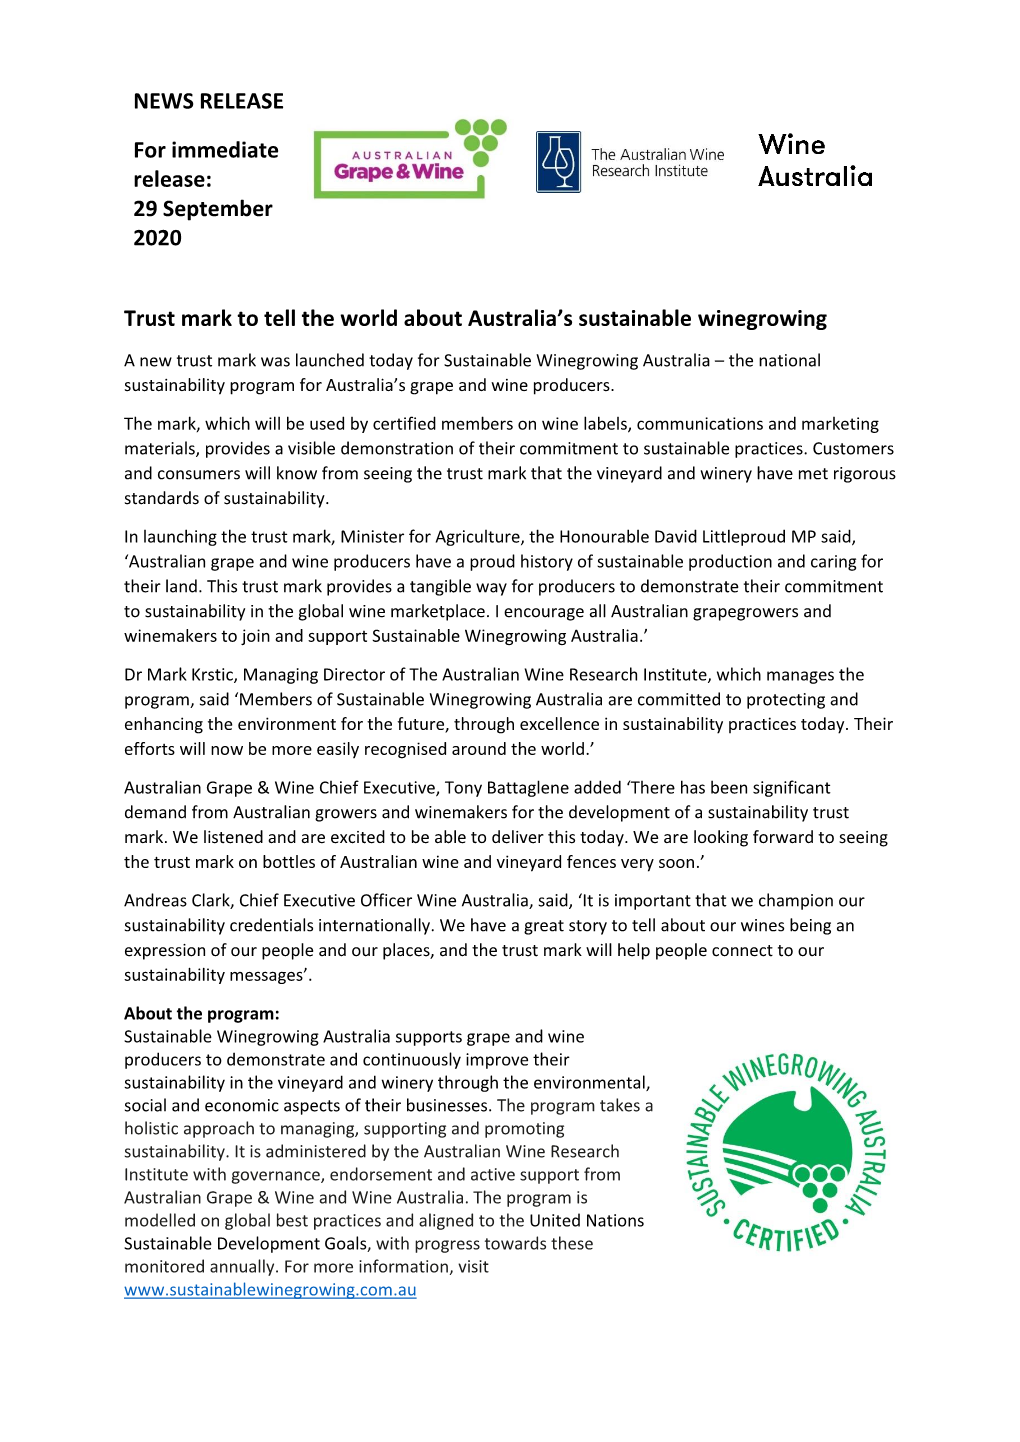 Trust Mark to Tell the World About Australia's Sustainable Winegrowing